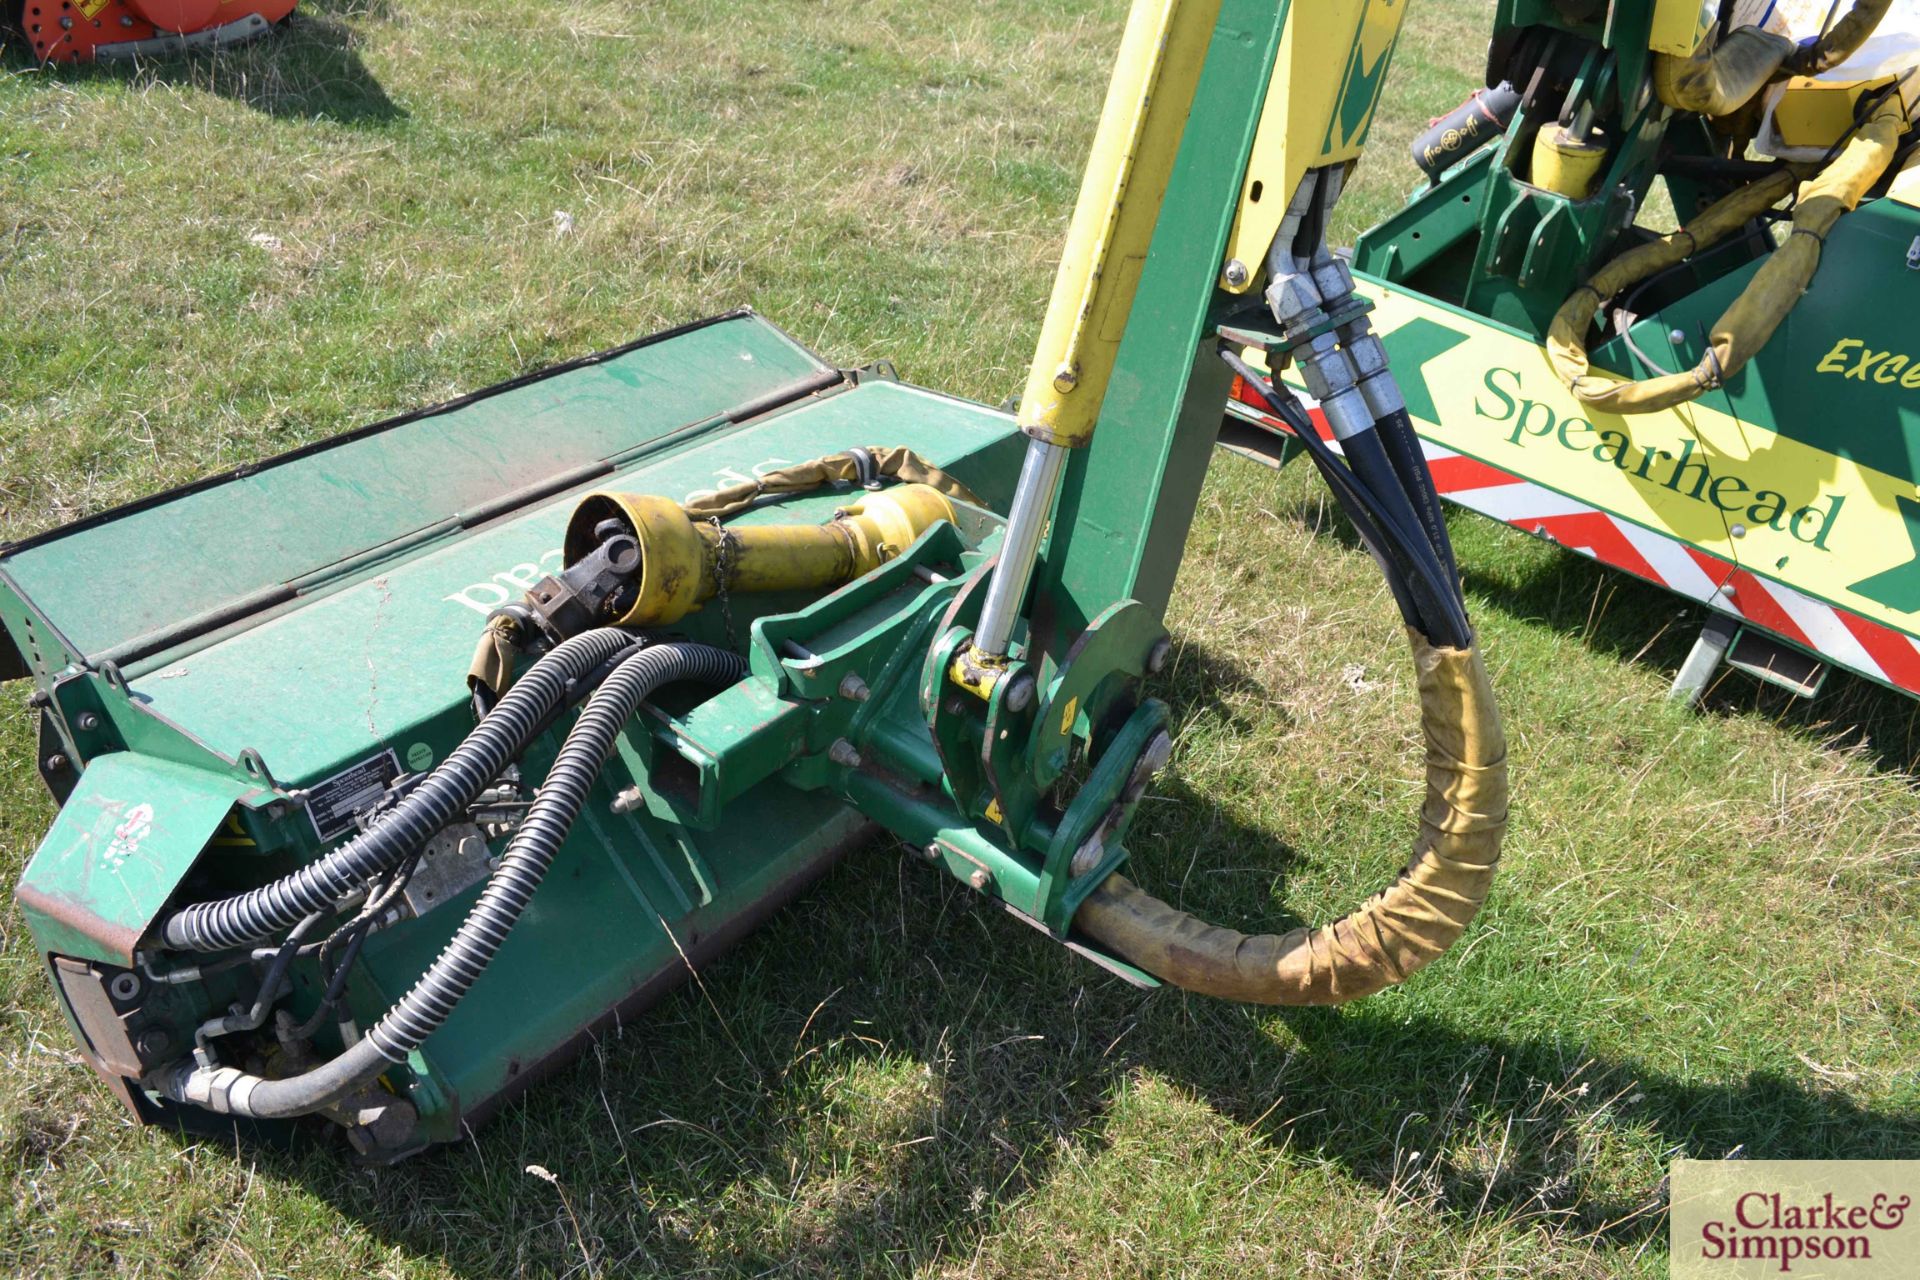 Spearhead XL605 linkage mounted hedge cutter. 2007. Model number 9560301. Serial number S071308. - Image 14 of 17